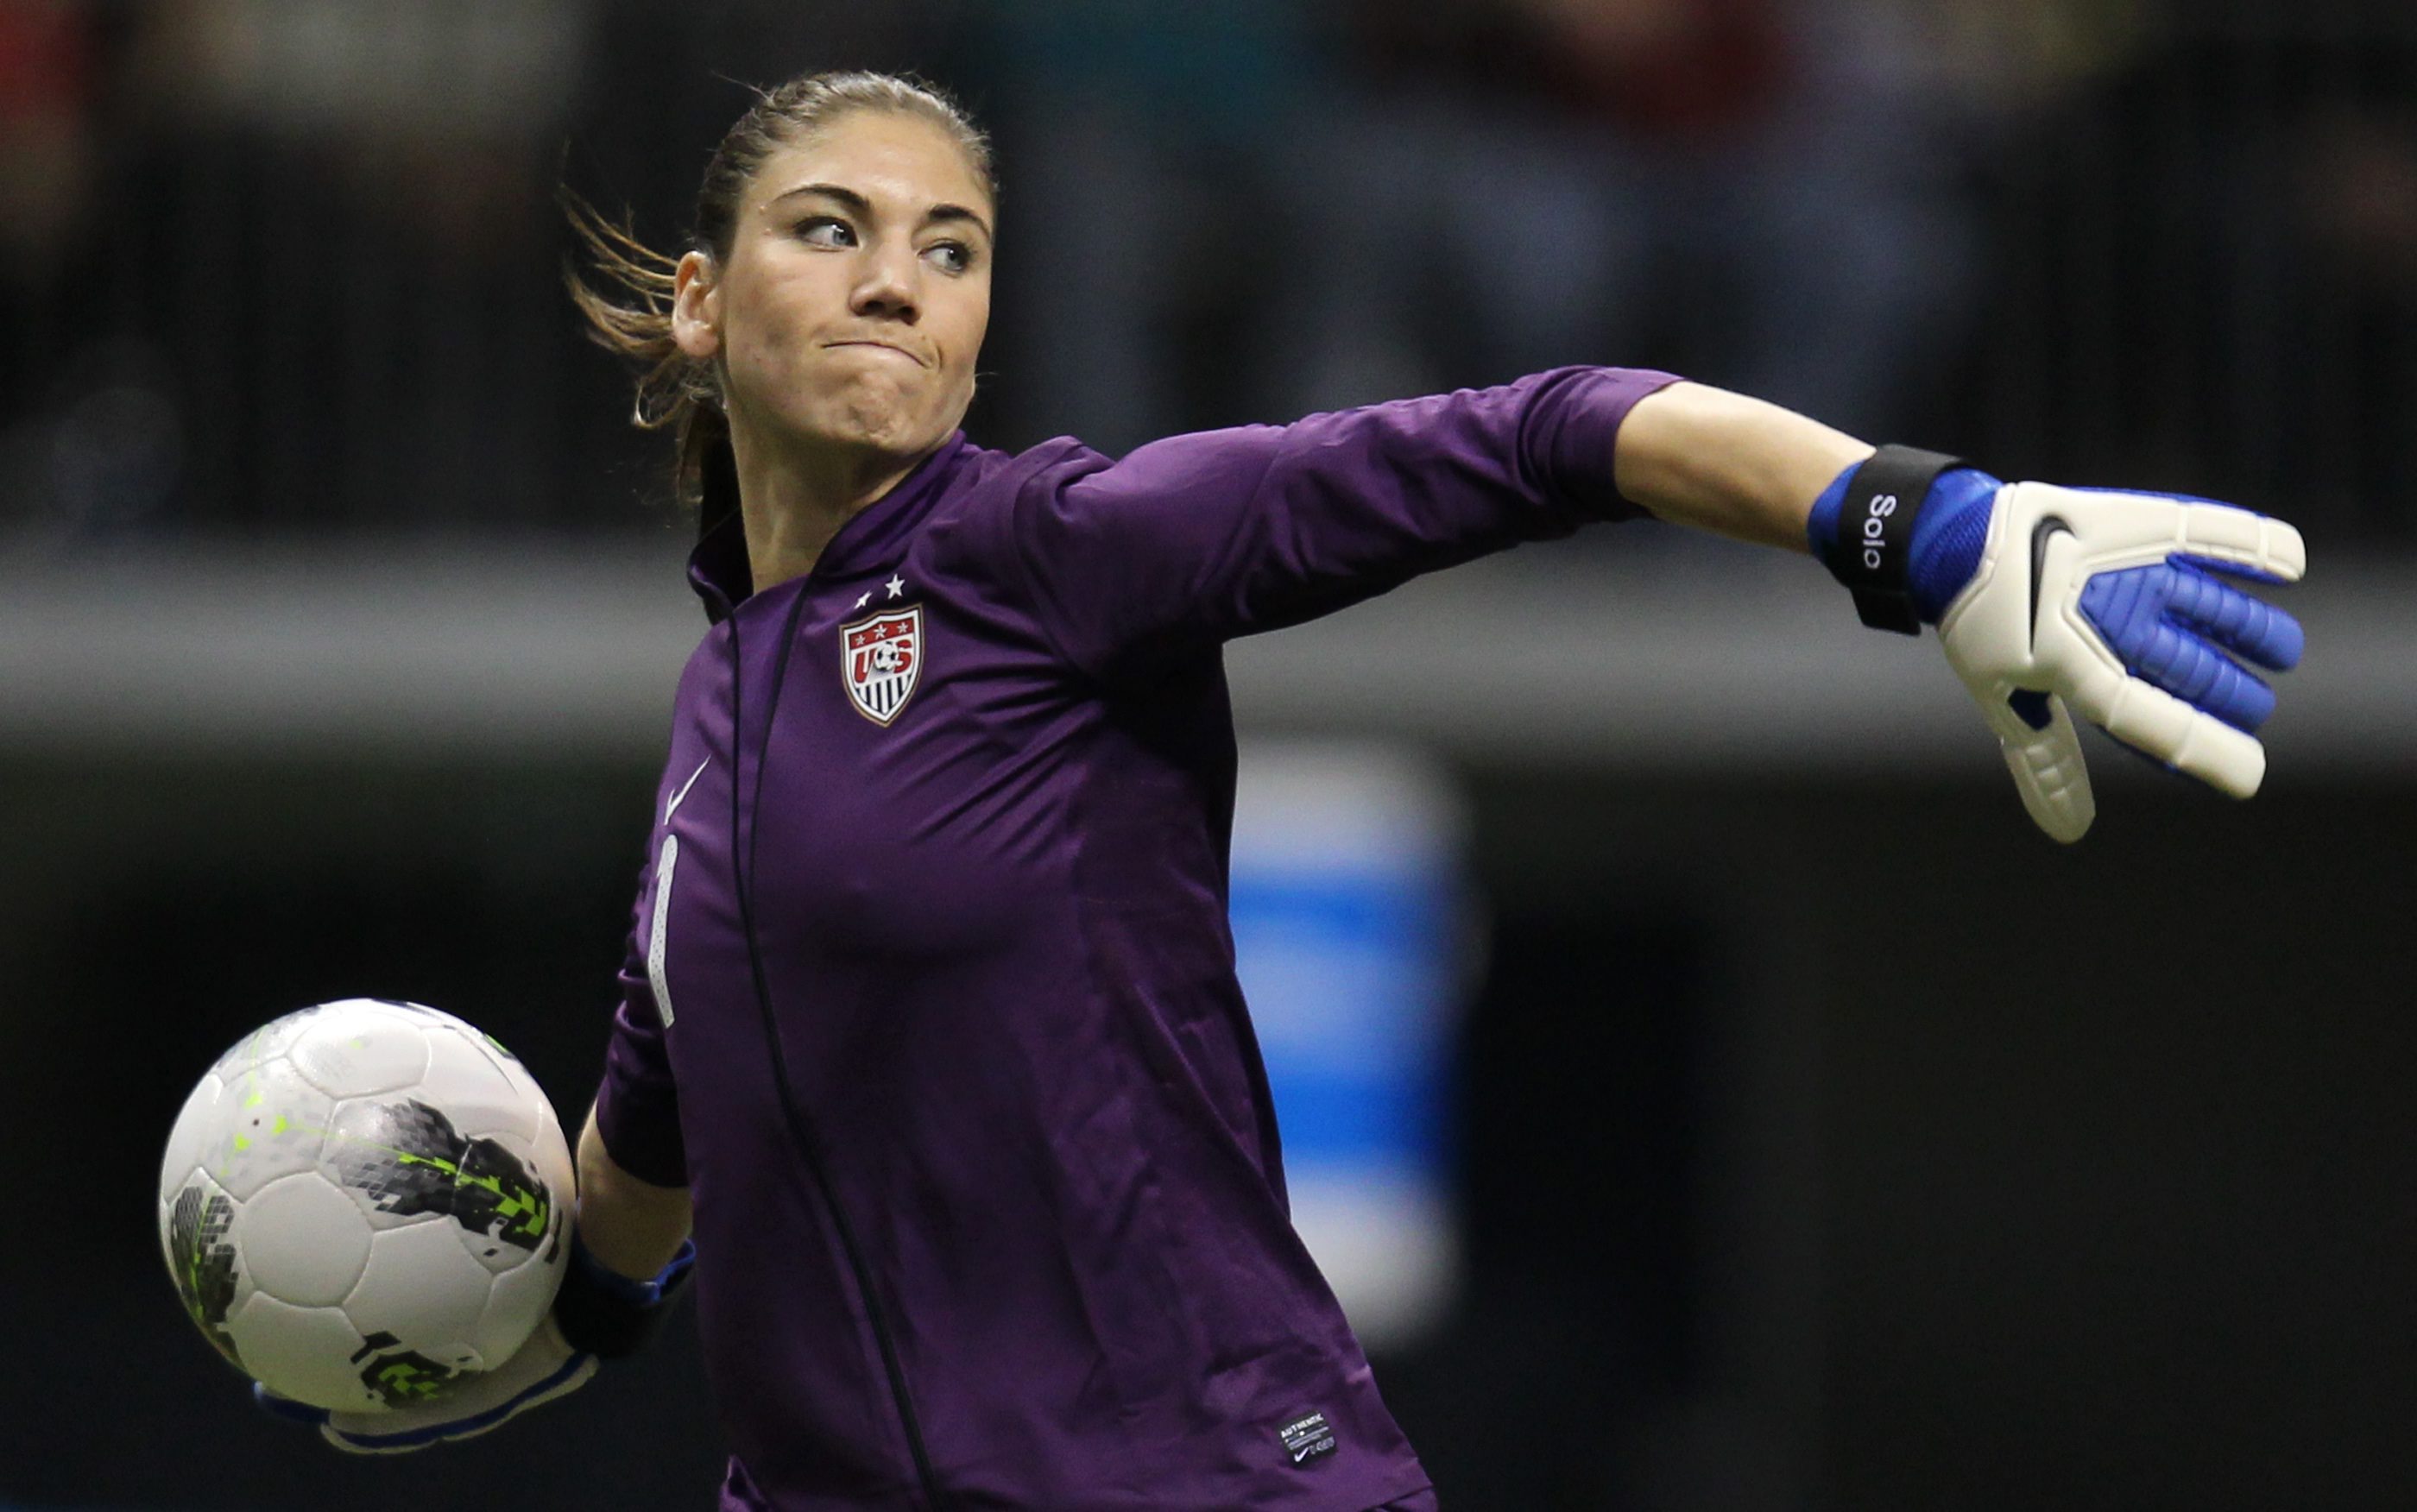 Top 7 Things We should learned About Hope Solo